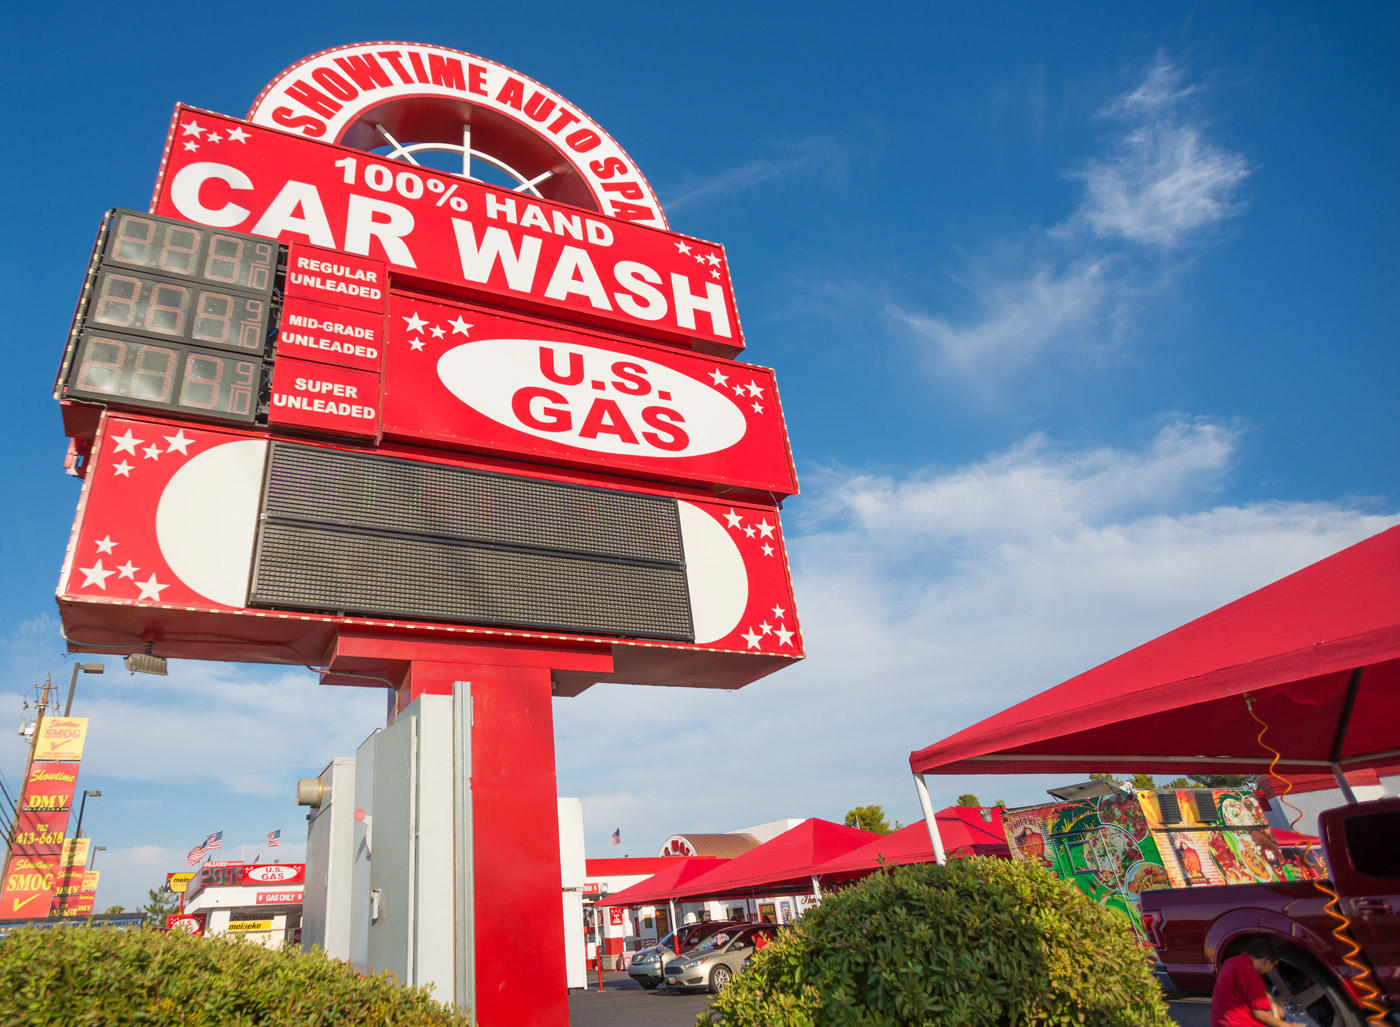 Showtime Car Wash Coupons near me in Las Vegas | 8coupons